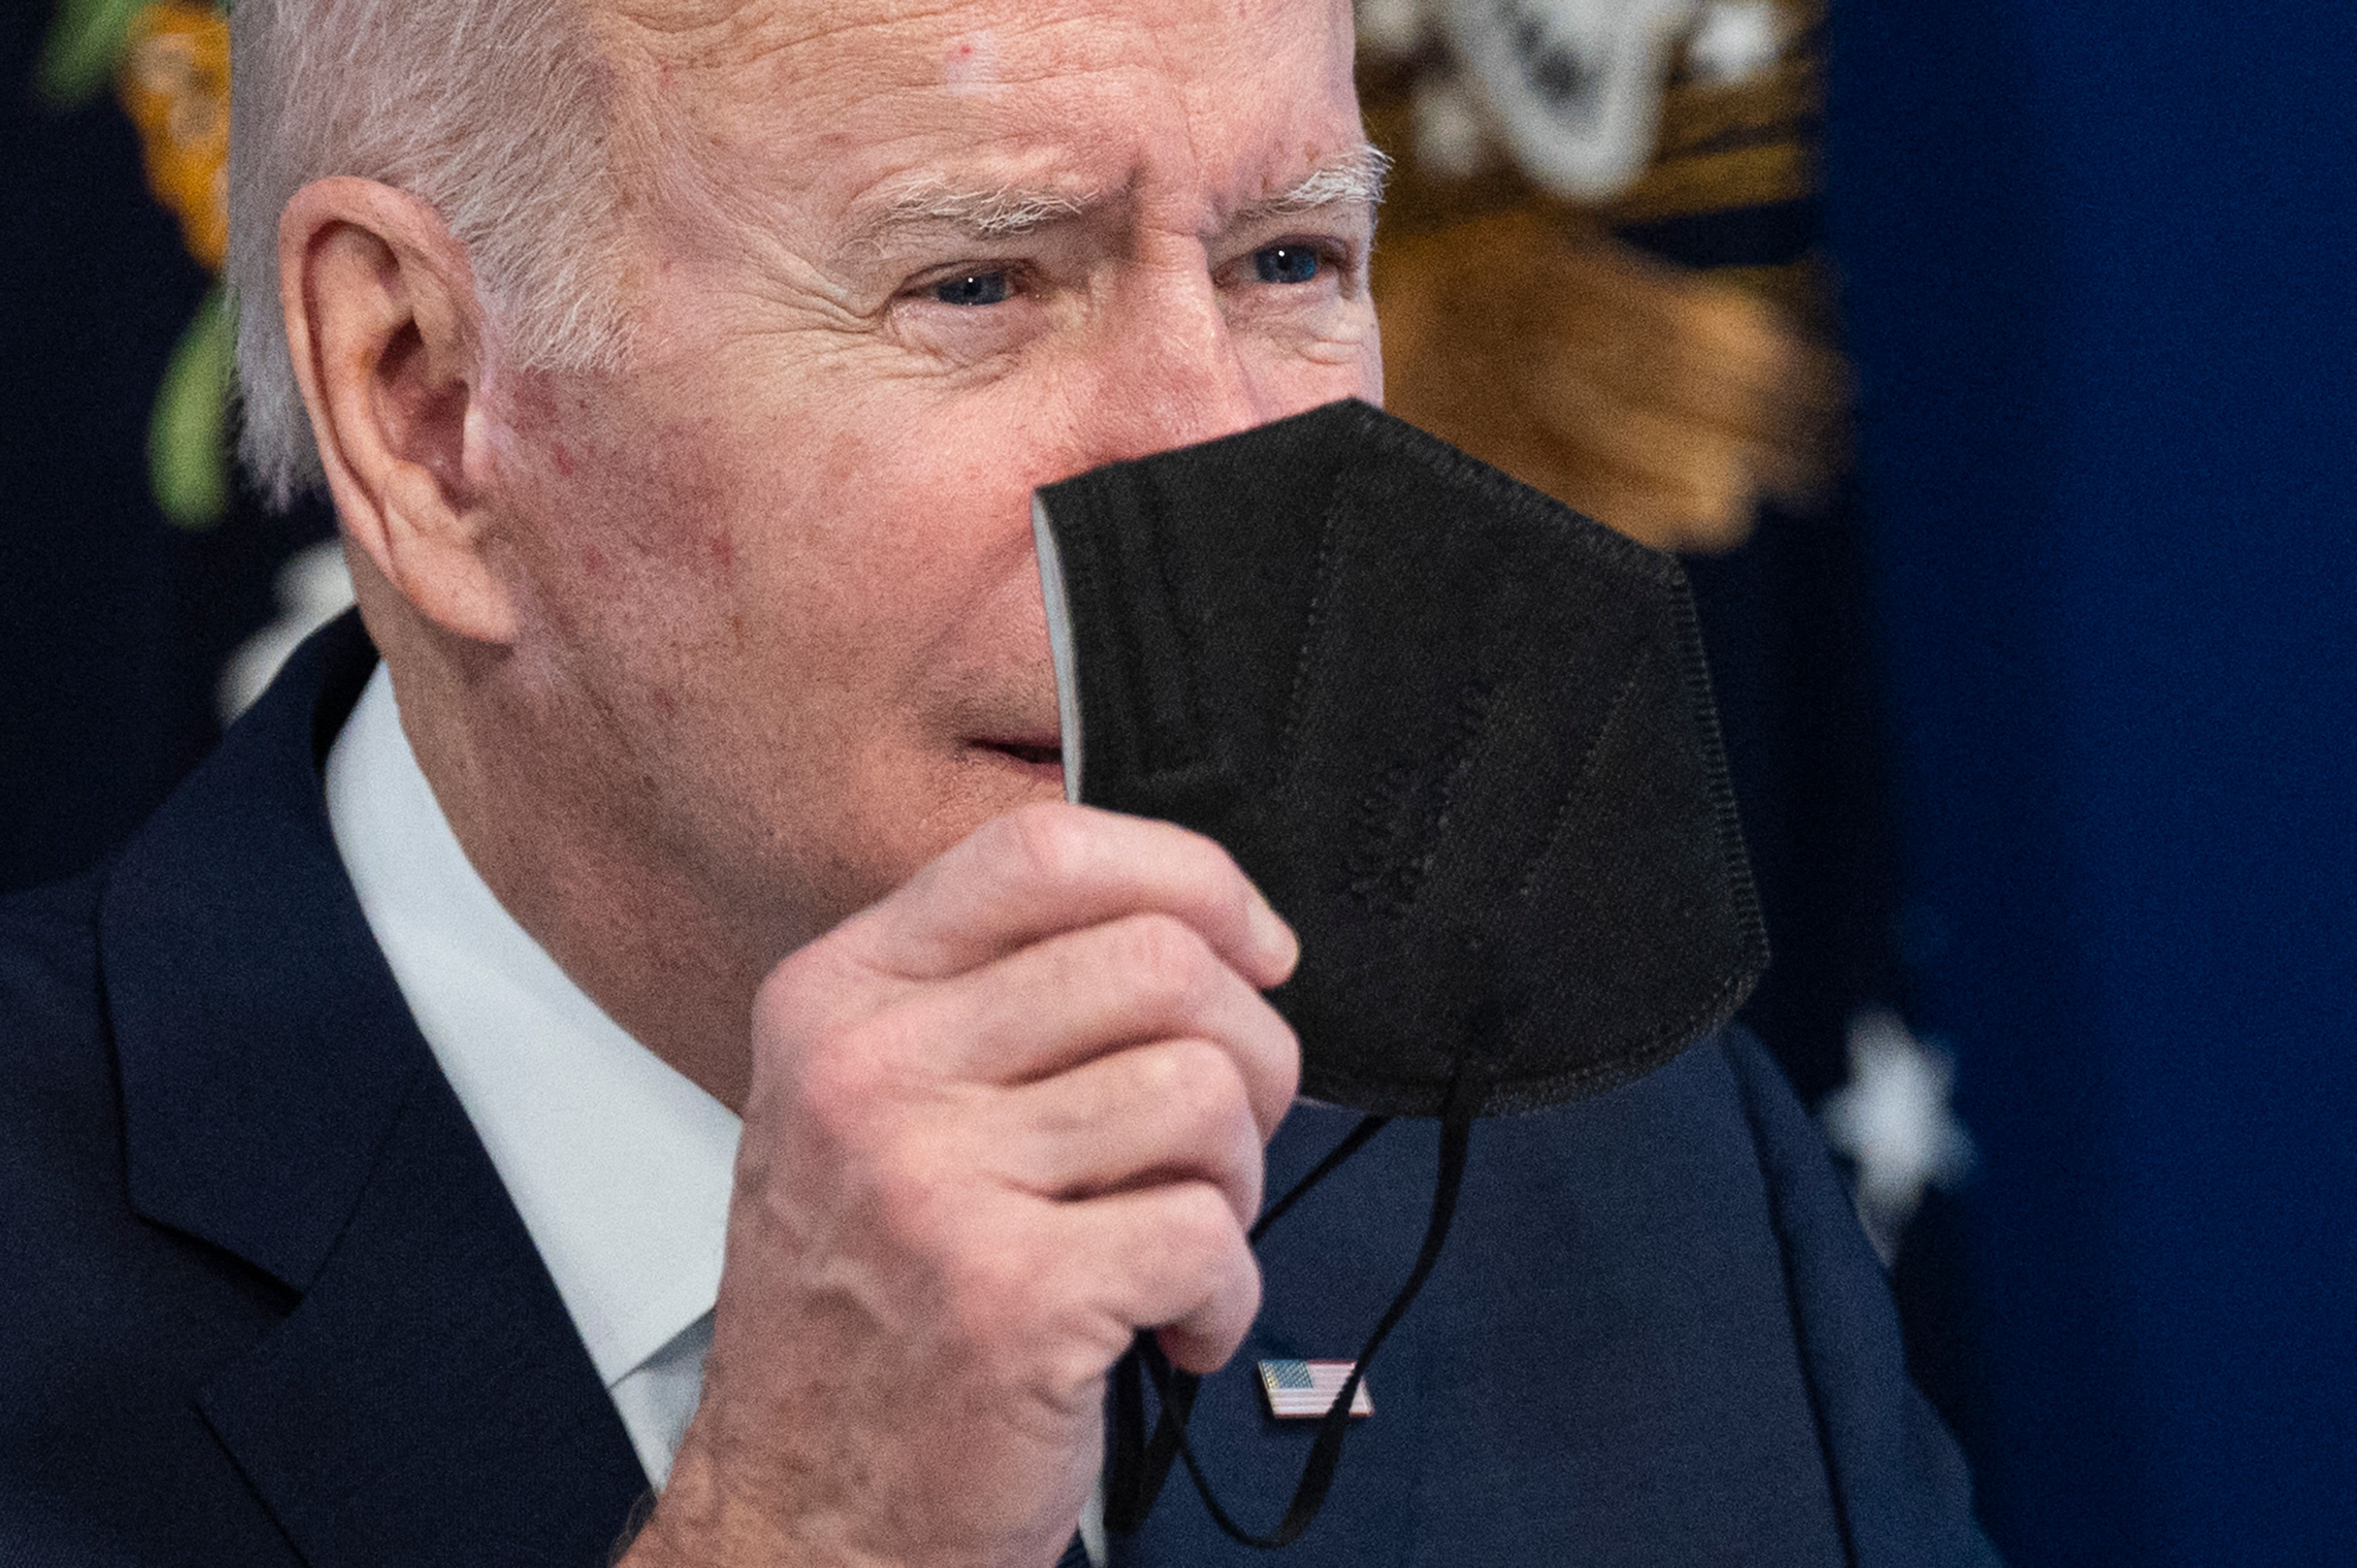 Biden says U.S. to provide high quality masks for free to Americans